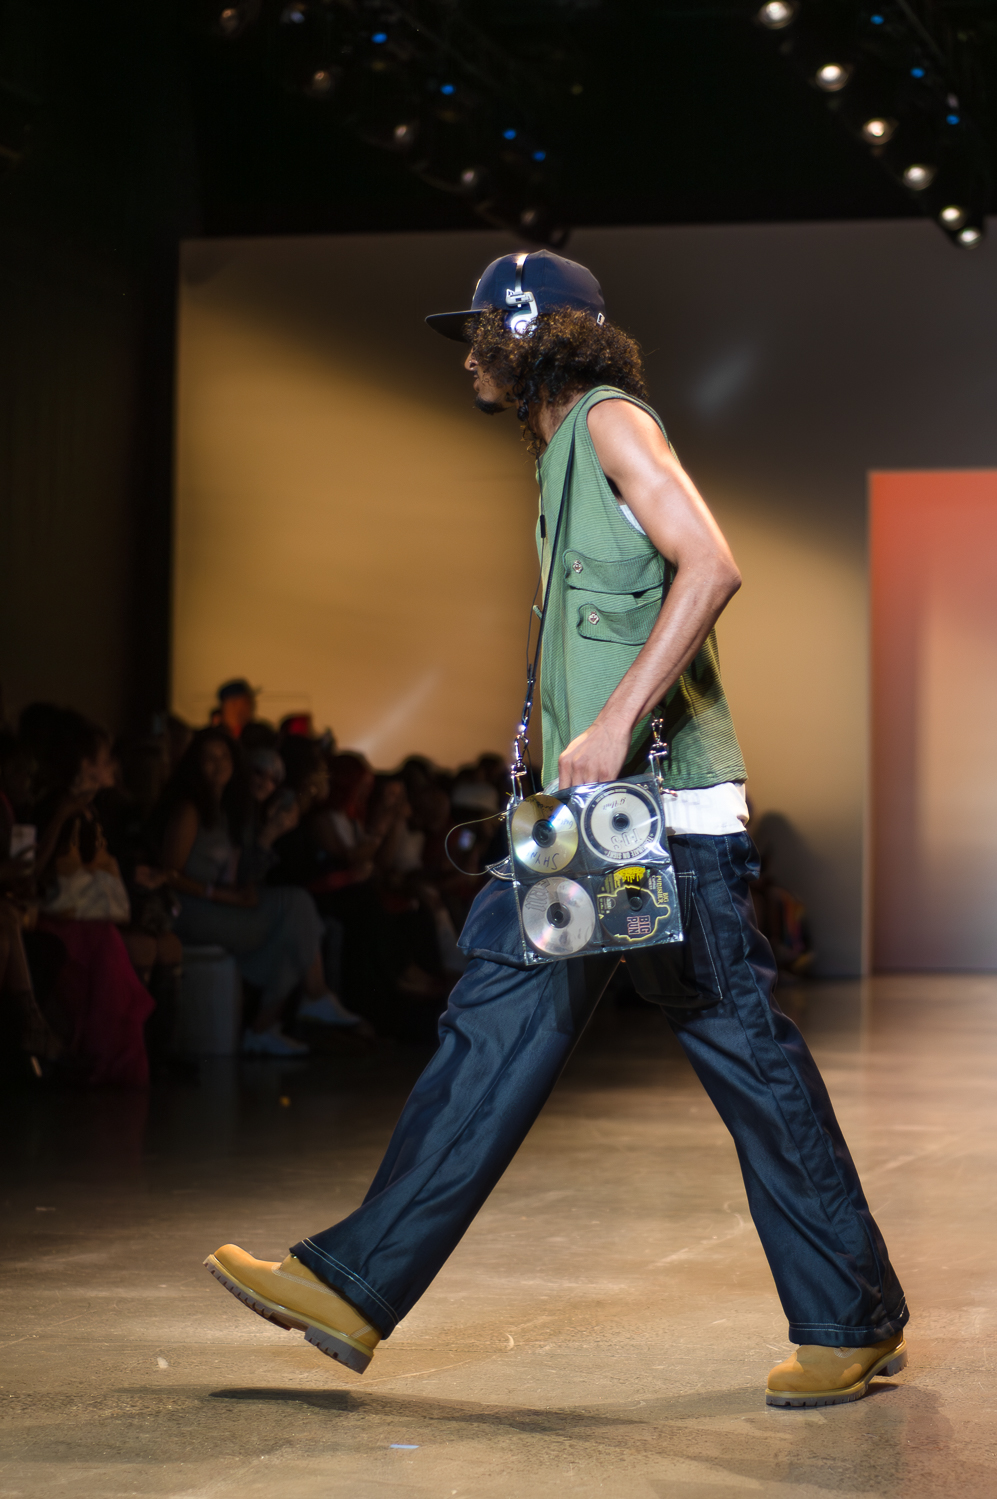 A model wearing a green, flowy tank top, white undershirt, and black pants turns toward the right while walking on a runway. The model wears a blue baseball cap, a headset, and brown lace-up boots. Over the model’s shoulder is a bag with four C.Ds visible.